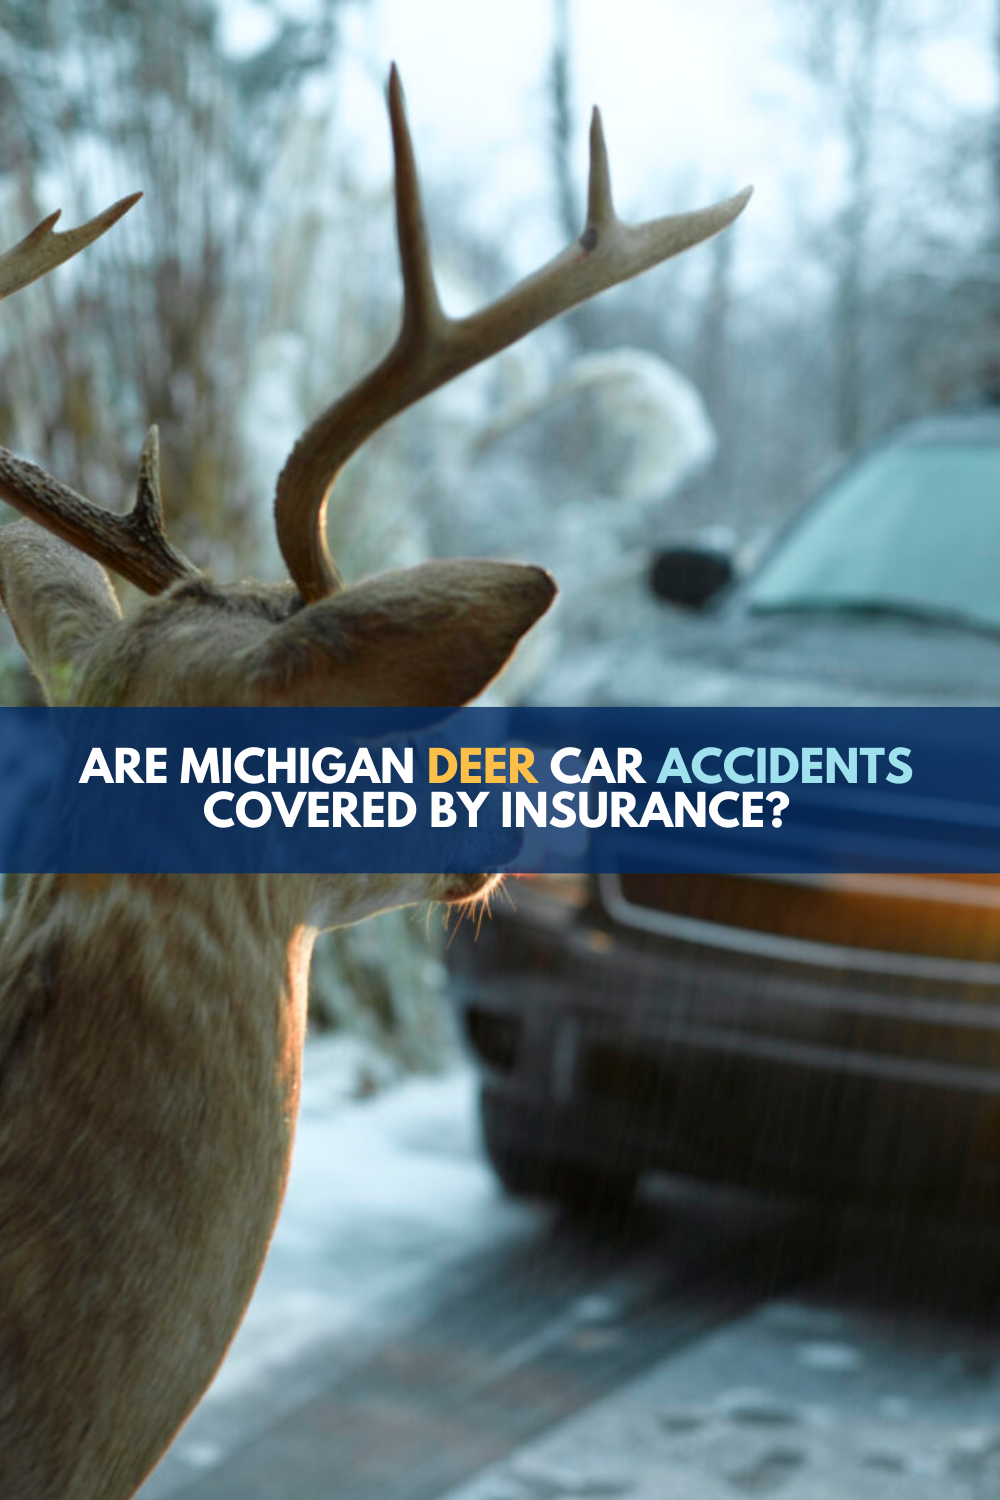 Michigan Deer Car Accidents: Are They Covered By Insurance?